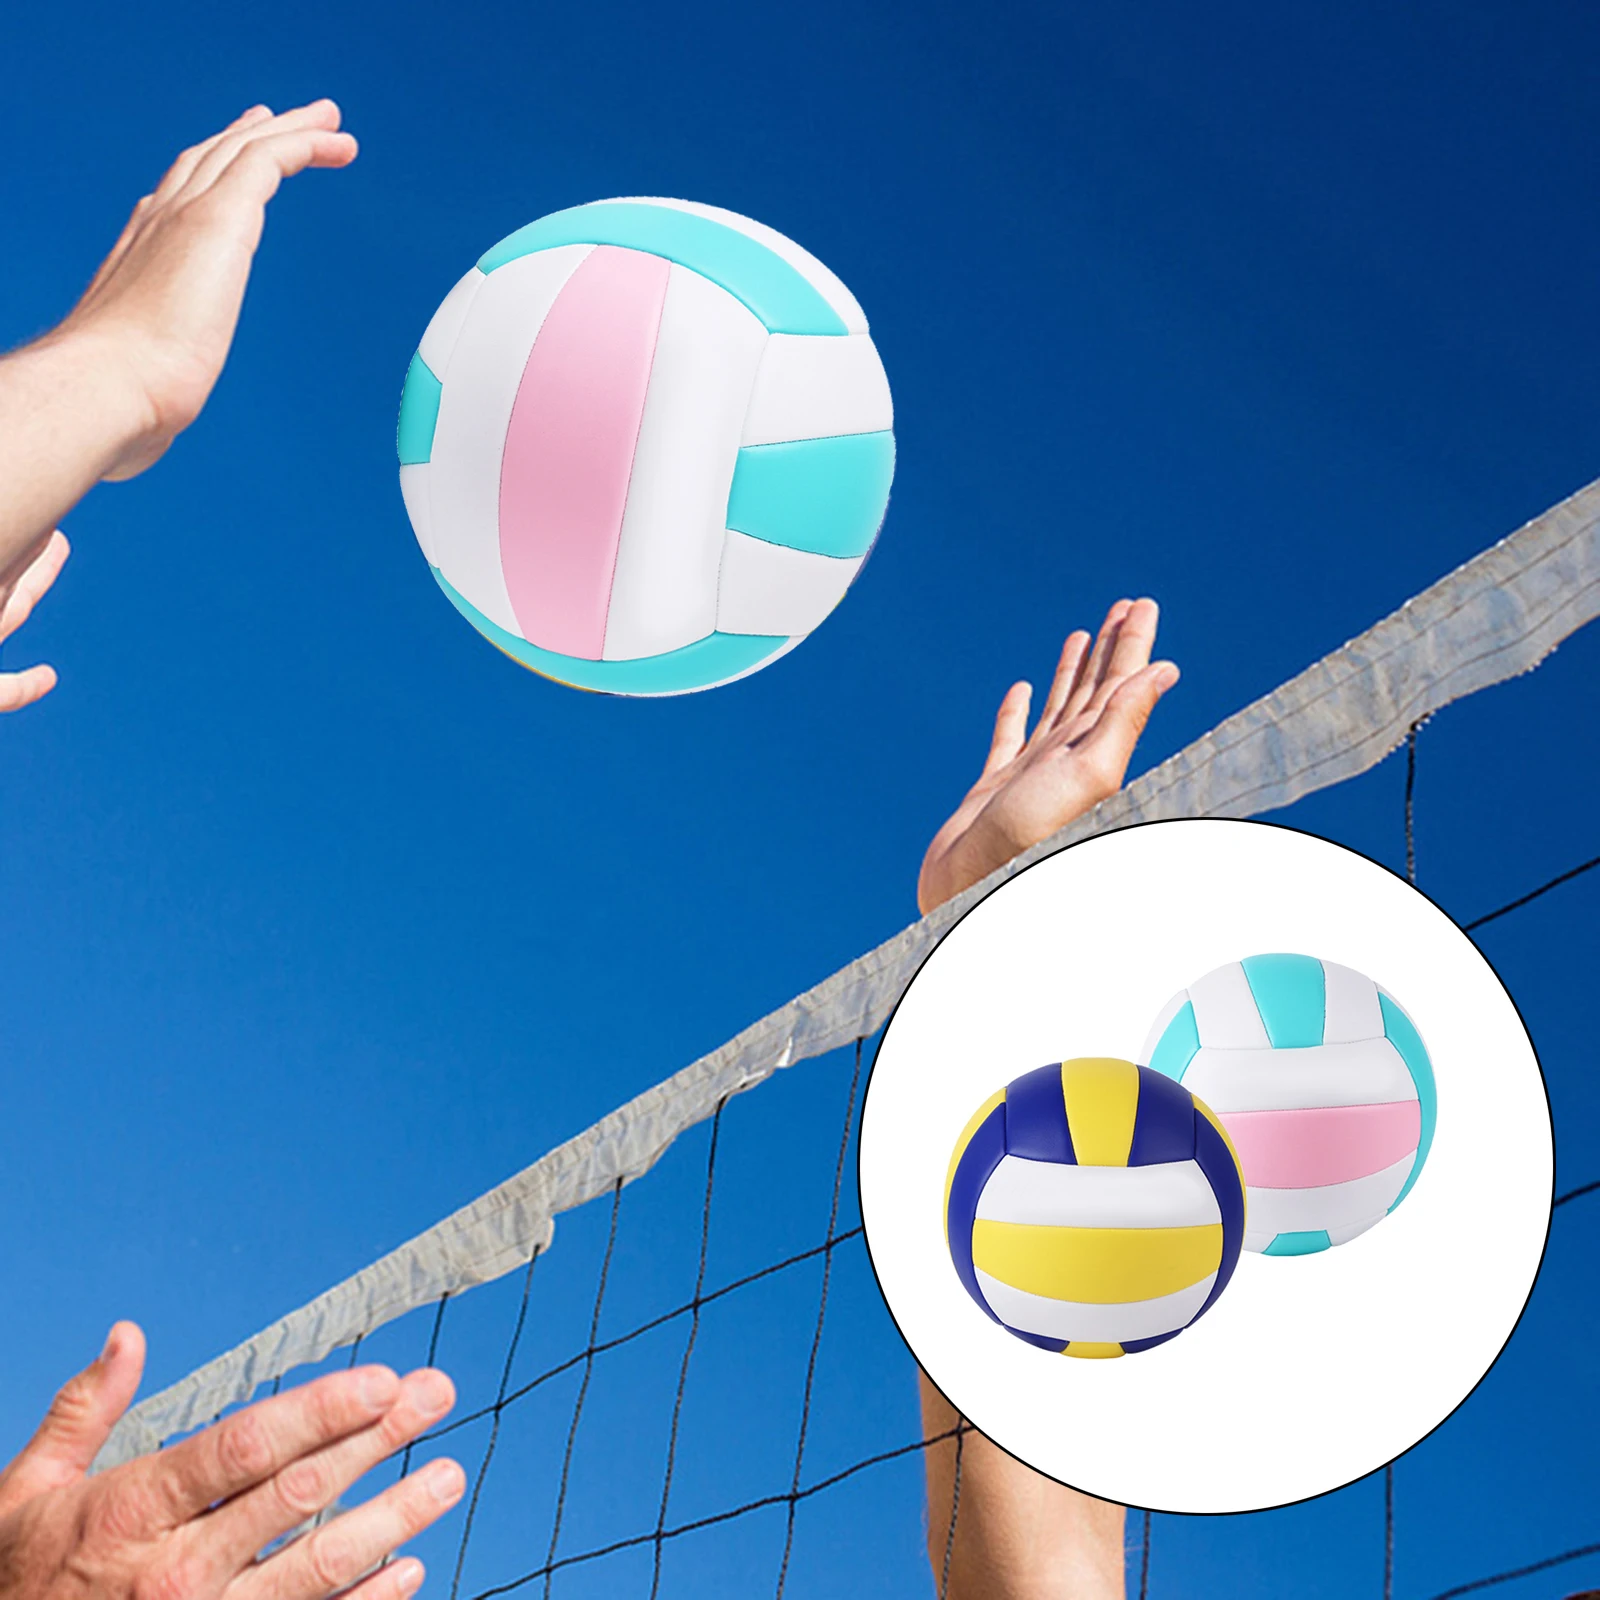 Match Game Official Recreational Ball for Kids Adult Adults Pool Gym Training Competition Soft Touch Beach Volleyball Ball Yunyan Beach Volleyball for Indoor Outdoor 